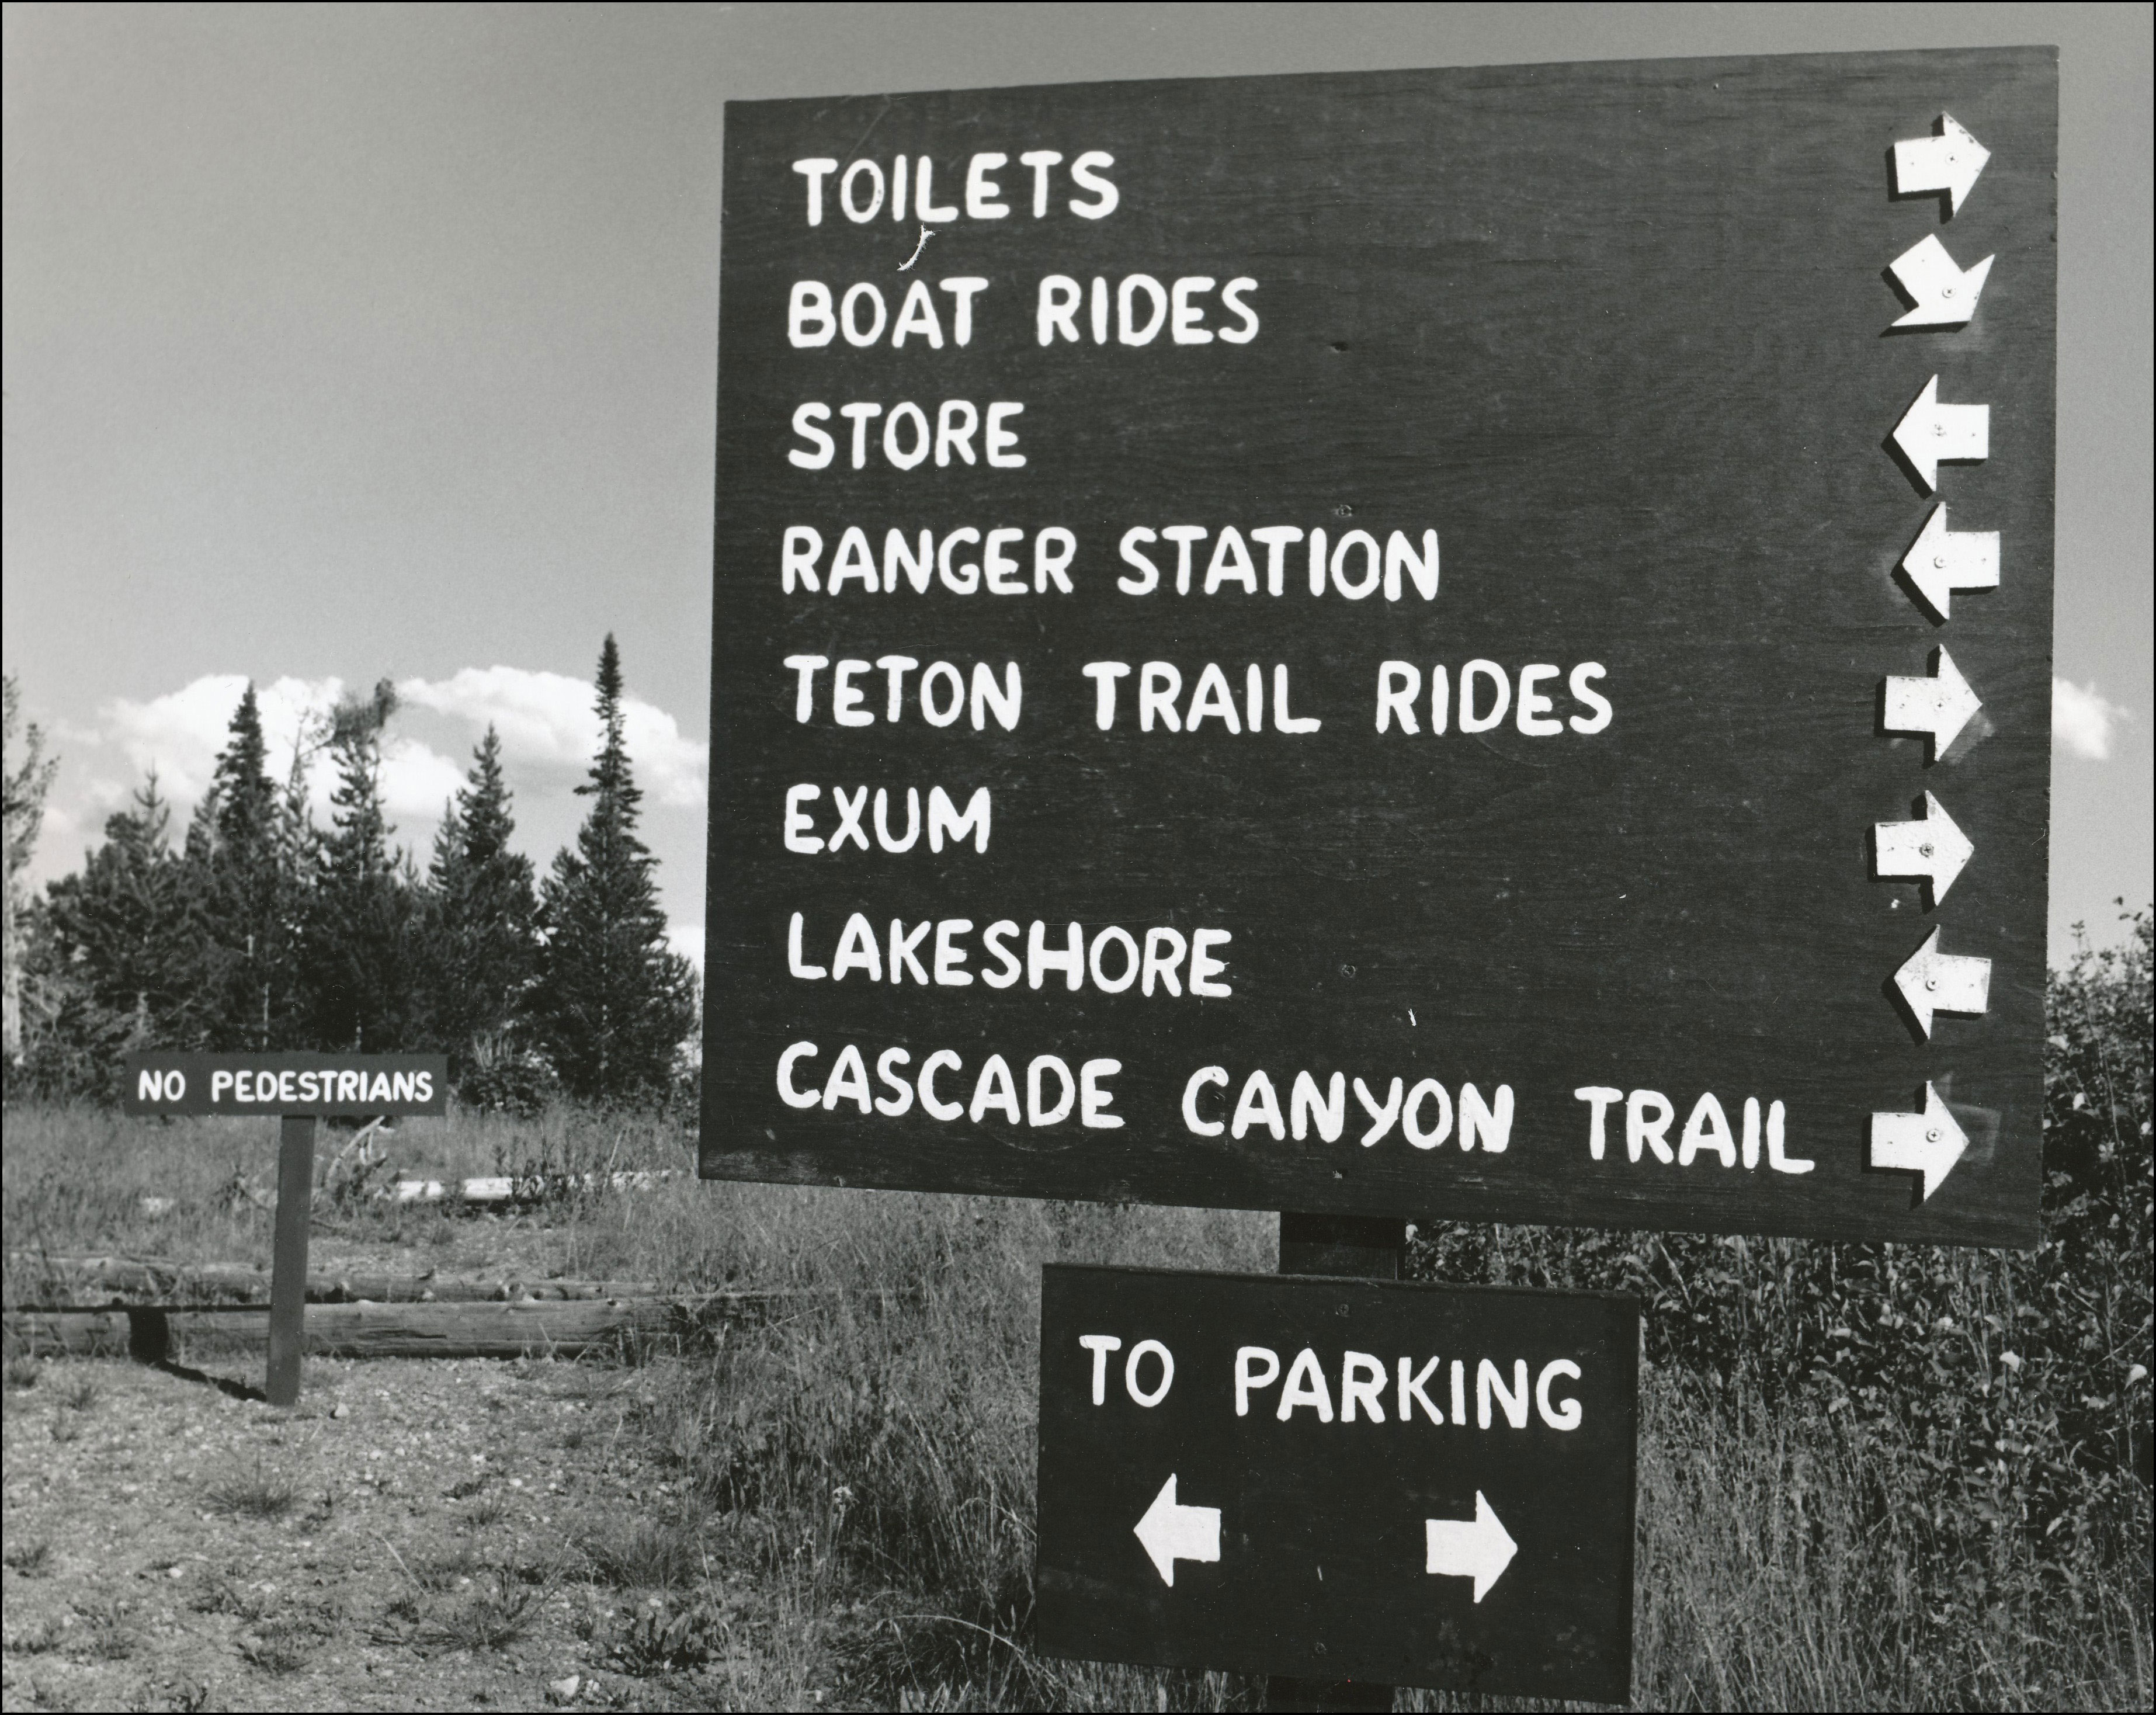 Sign at a national park pointing out different places to go, with one in the background that says No Pedestrians. Main sign lists with arrows to each Toilets, Boat Rides, Store, Ranger Station, Teton Trail Rides, Exum, Lakeshore, Cascase Canyon Trail. Grass and Pine trees in the background.